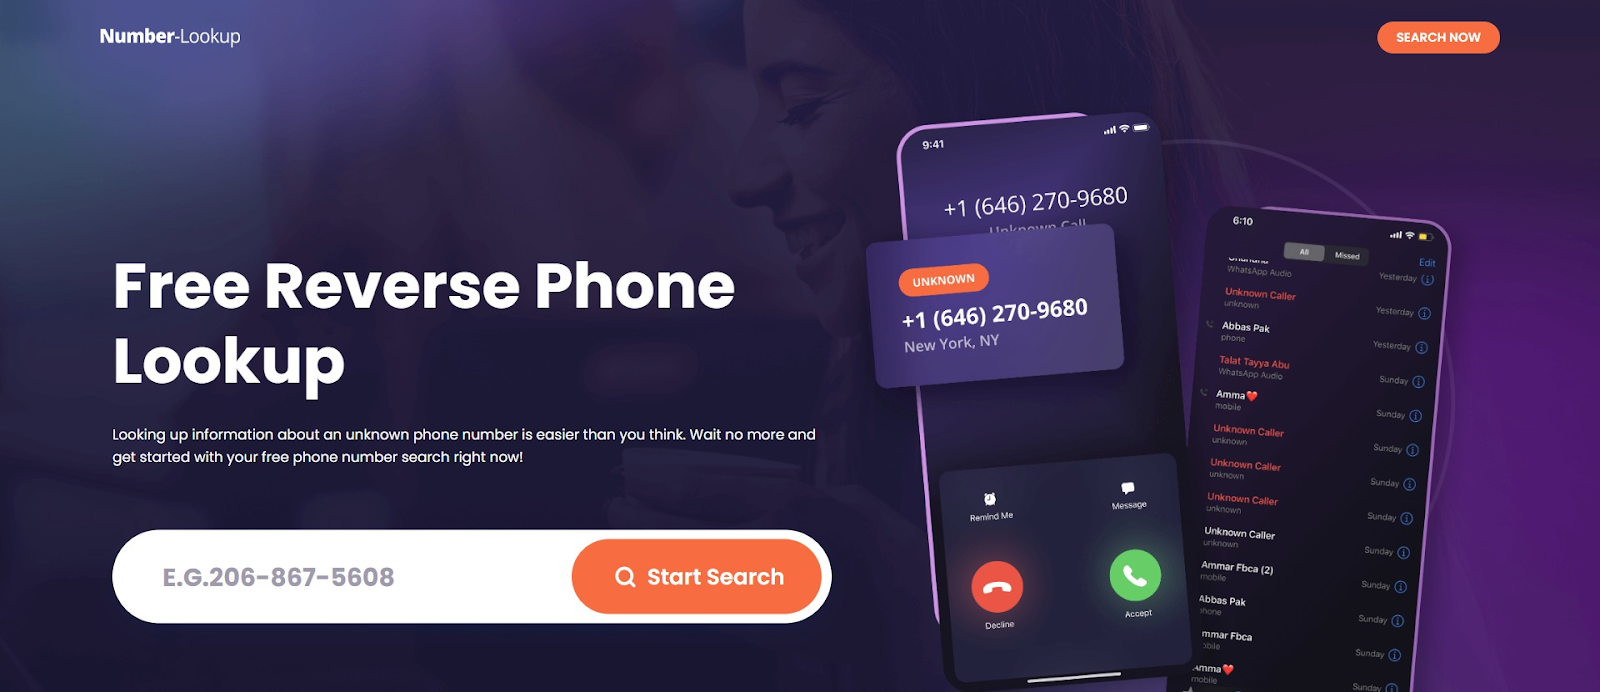 NumberLookup Review: The First-Rate Reverse Phone Lookup